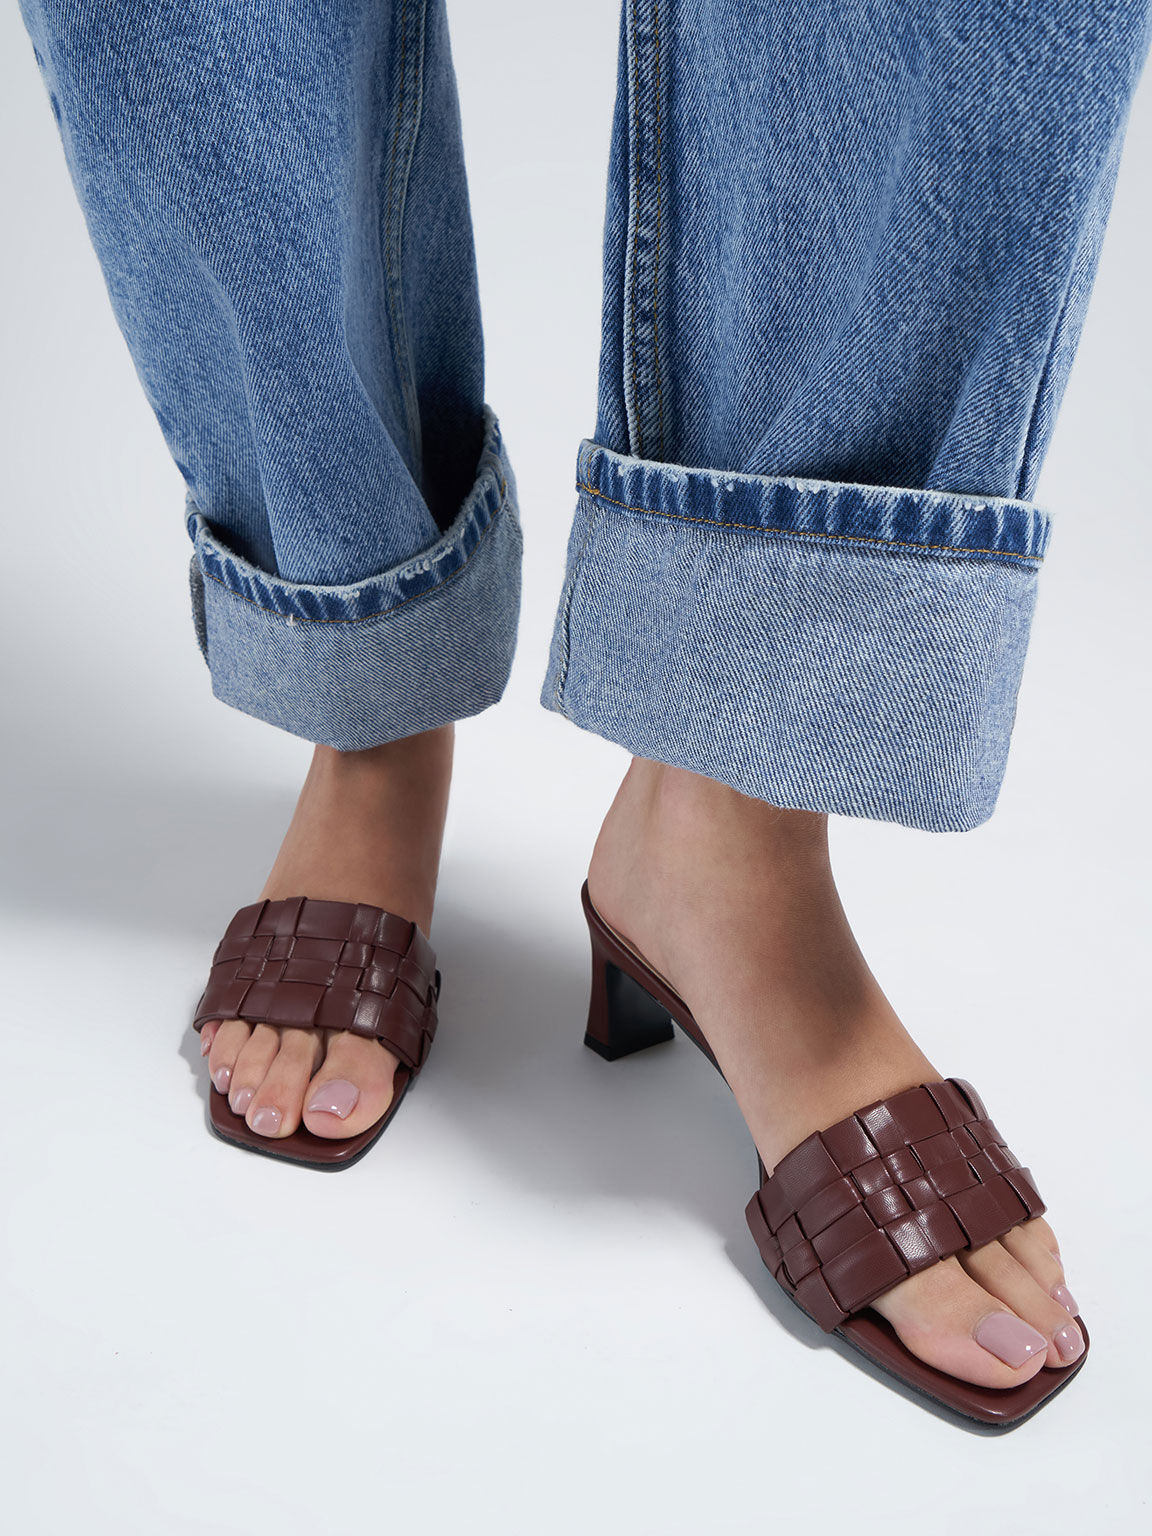 Woven Square Toe Mules, Brown, hi-res